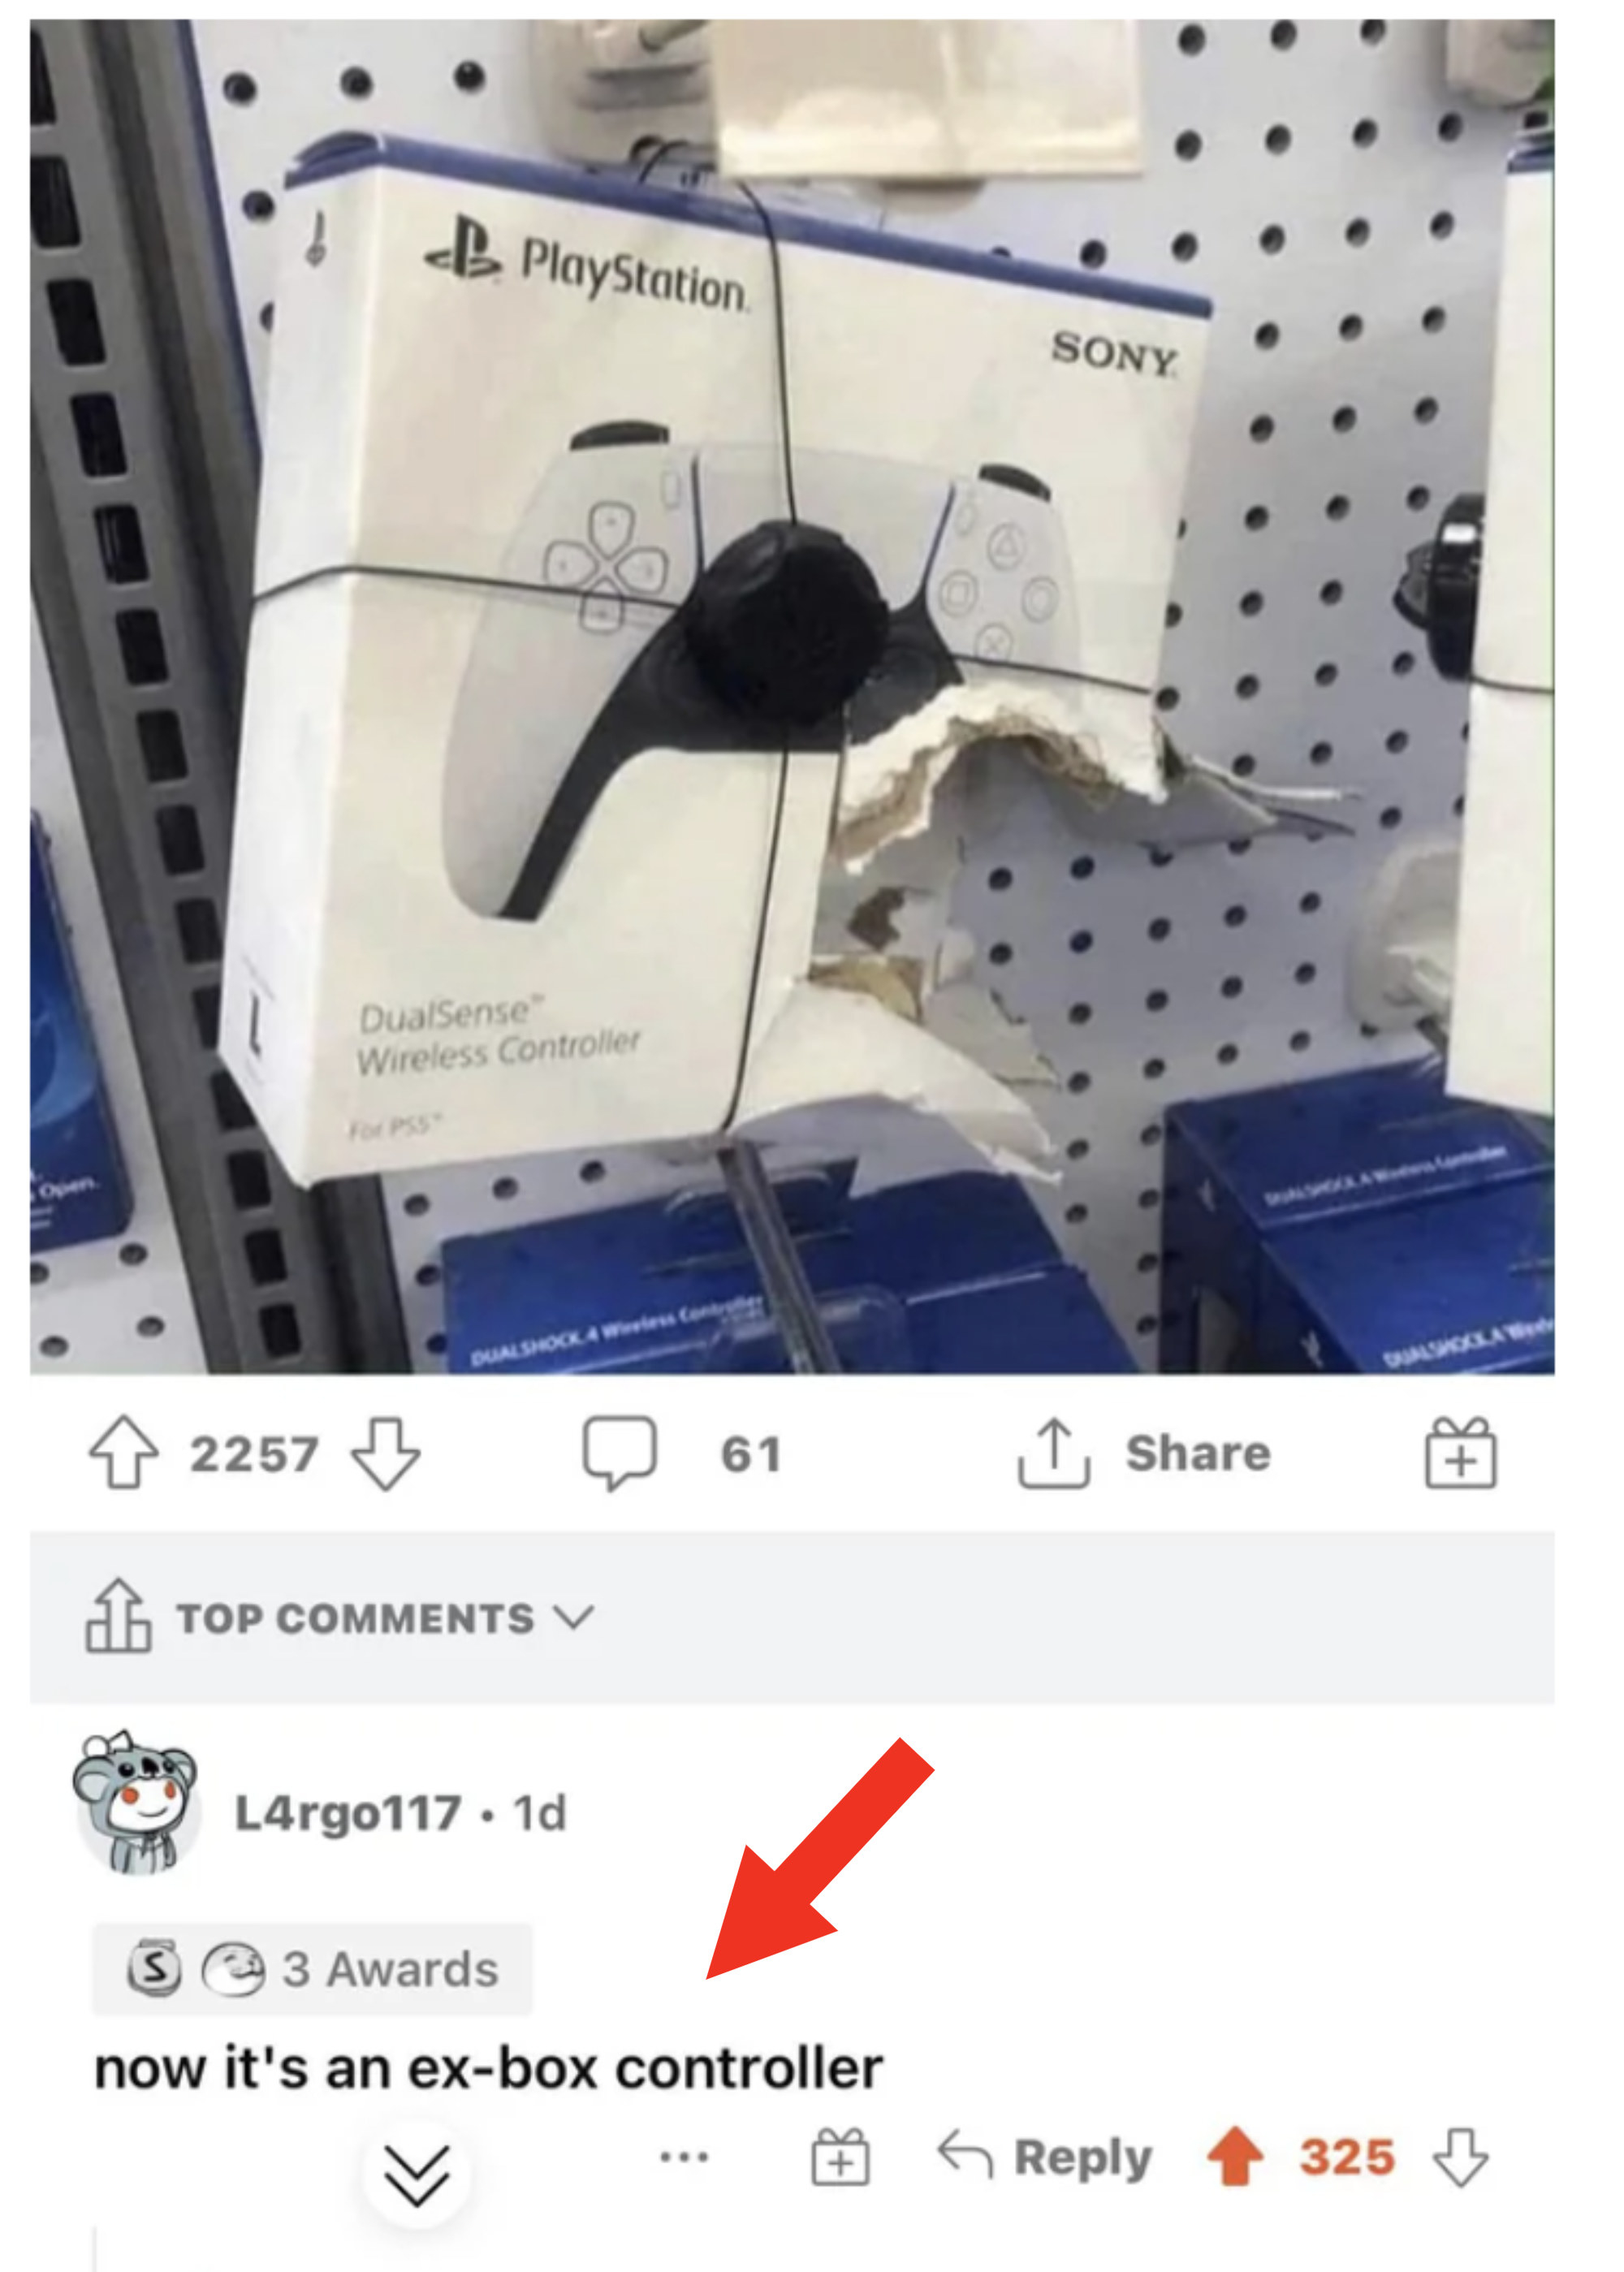 A photo of a PlayStation 5 controller box shows someone ripped the box open and stole the controller; the commenter says &quot;now it&#x27;s an ex-box controller&quot;